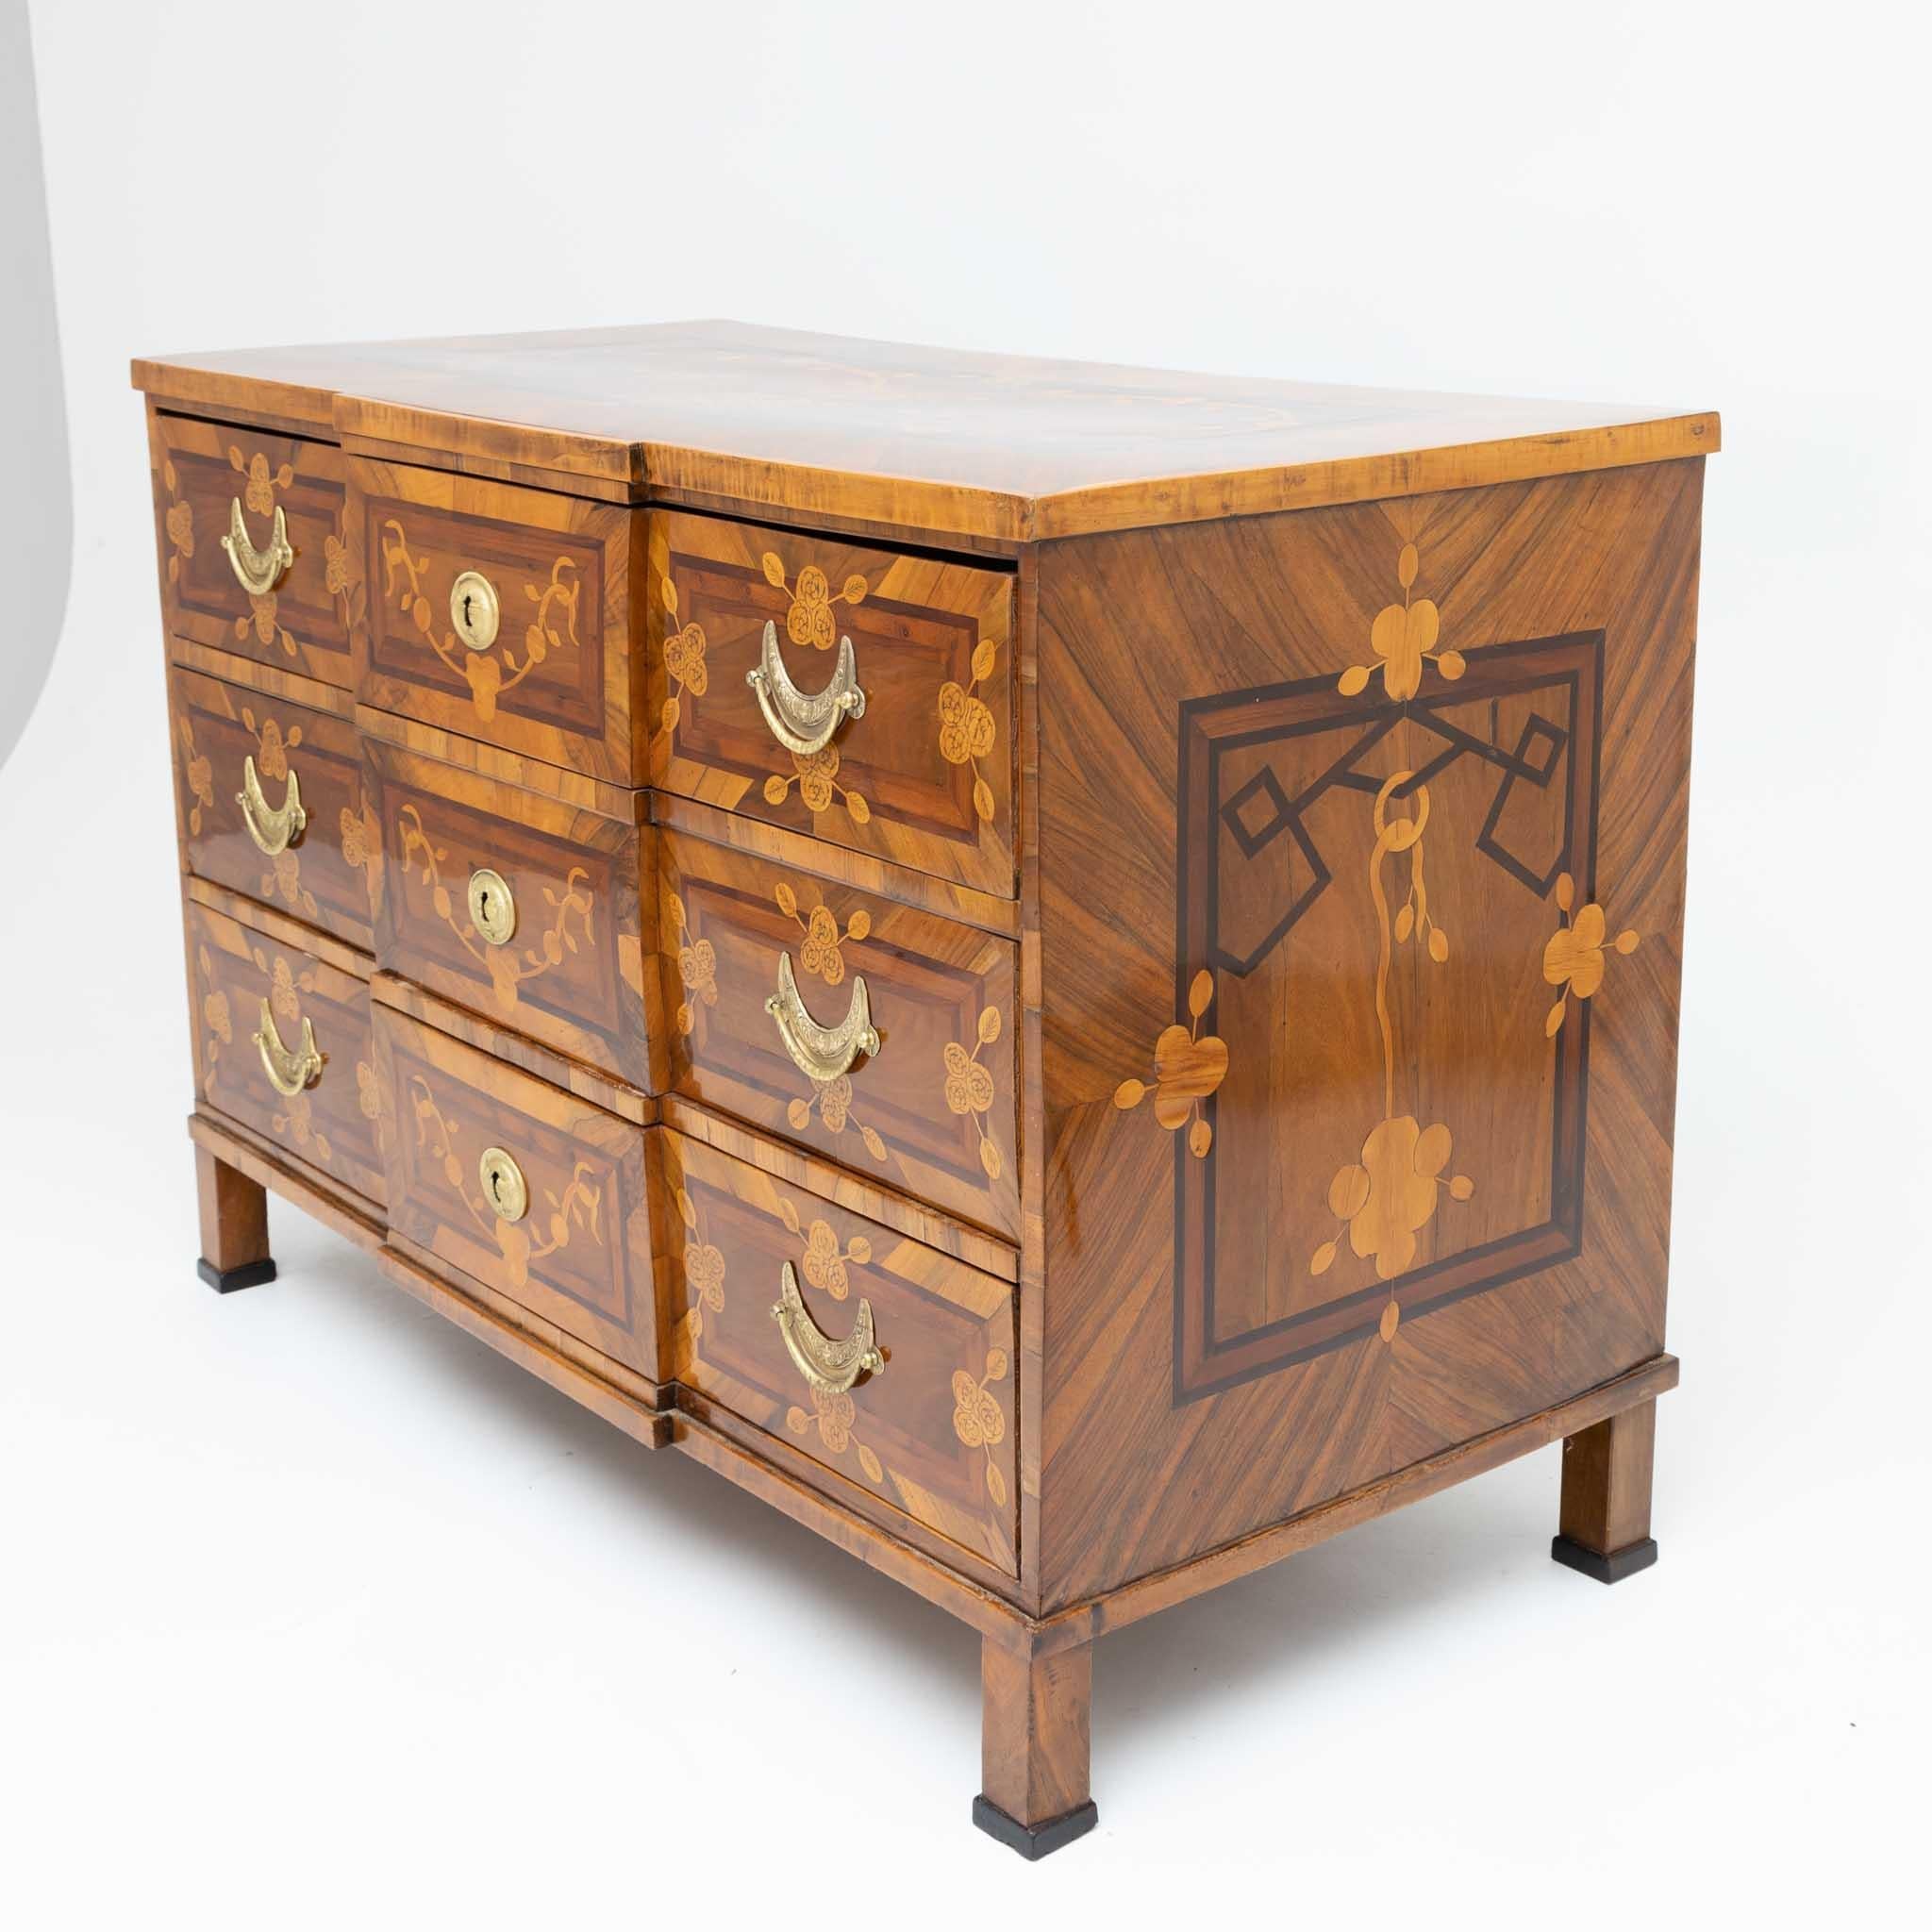 Louis Seize Marquetry Chest of Drawers, Walnut veneered, Late 18th Century For Sale 5